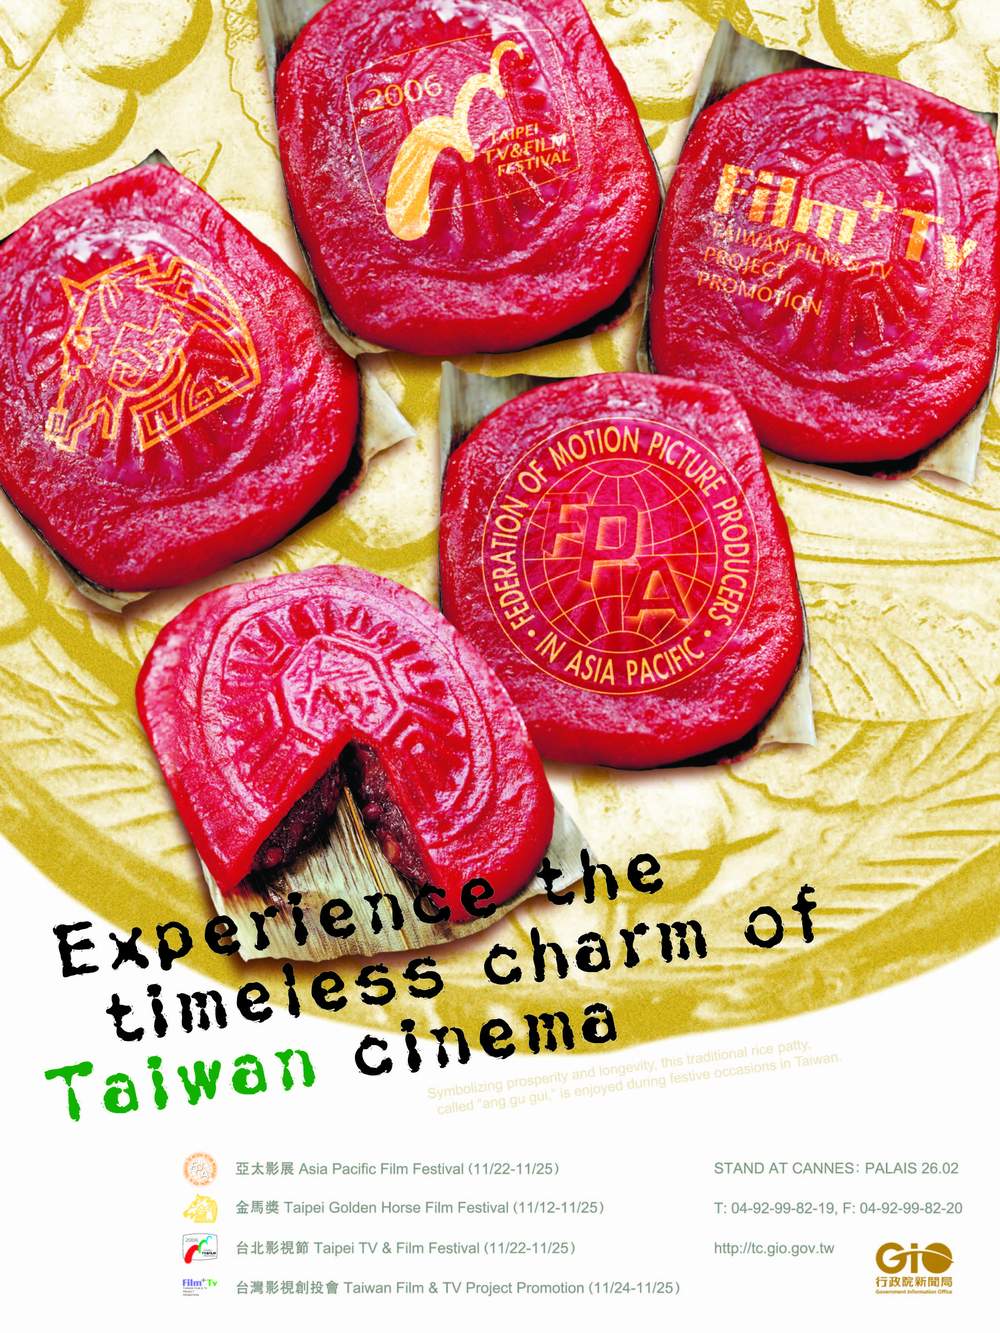 2006 Taiwan International Film and TV Expo (TIFTE)